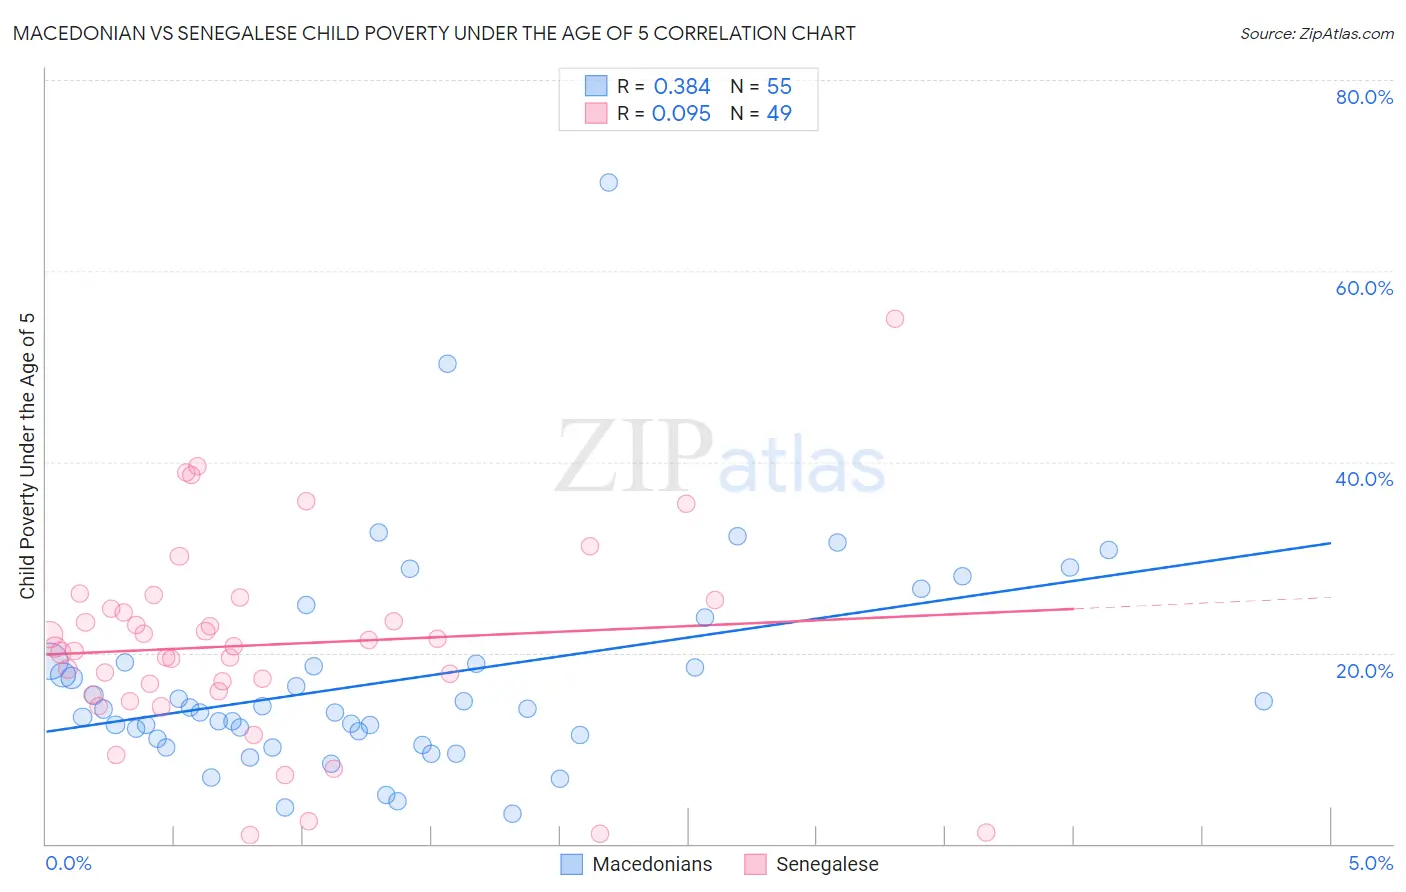 Macedonian vs Senegalese Child Poverty Under the Age of 5